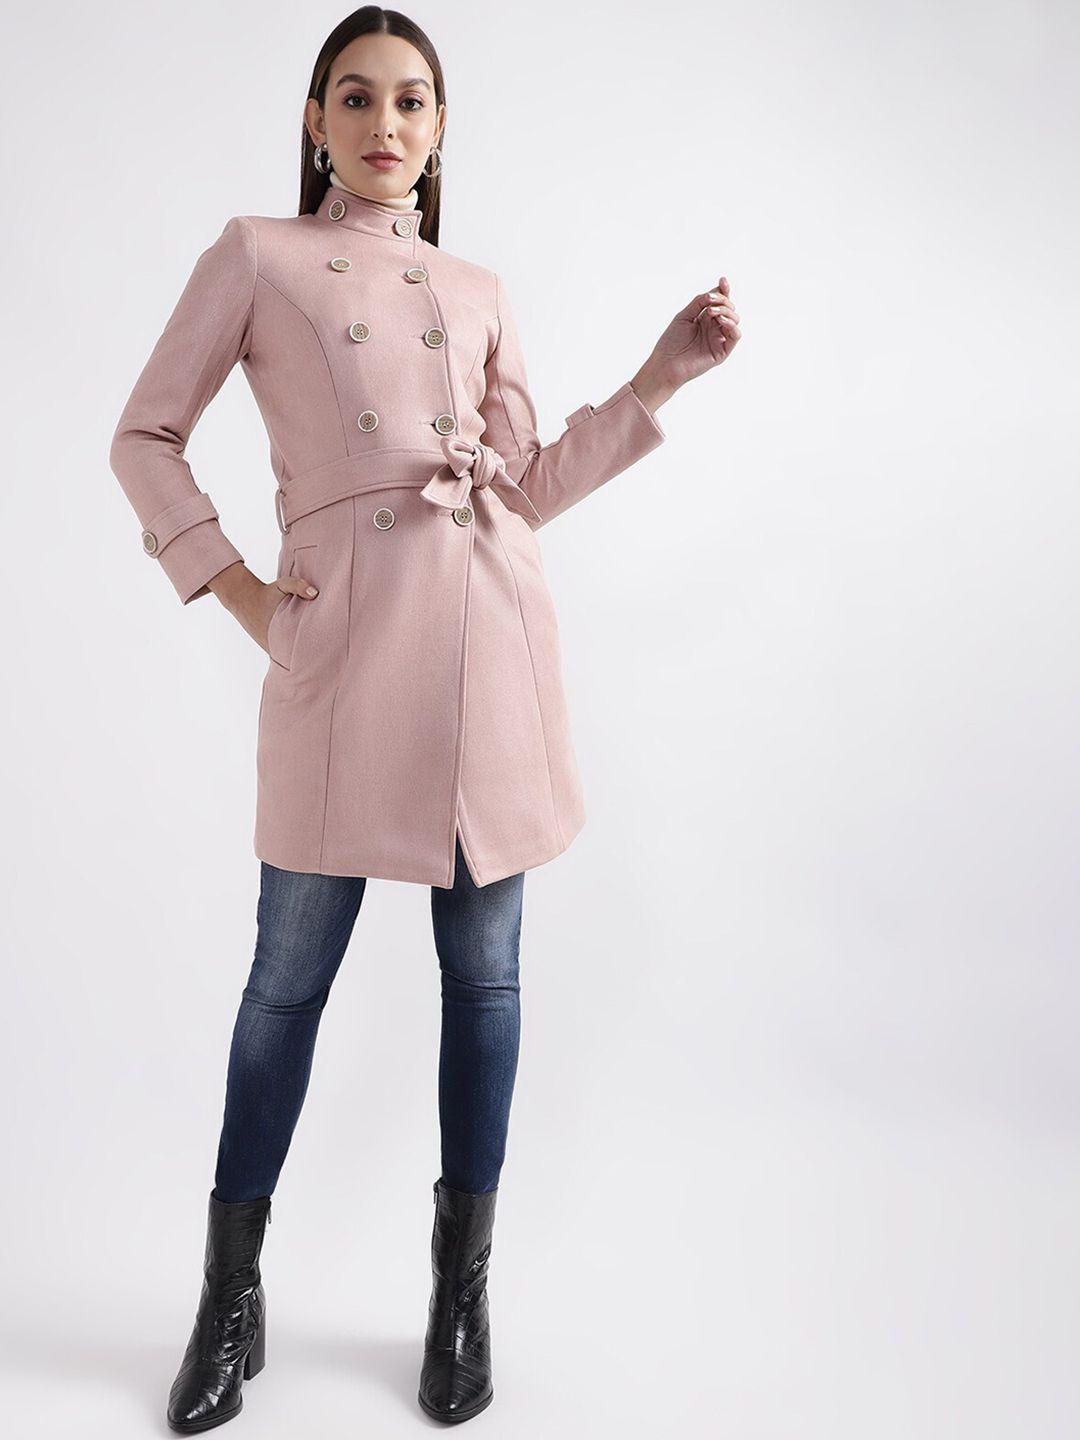 centrestage women double-breasted overcoat